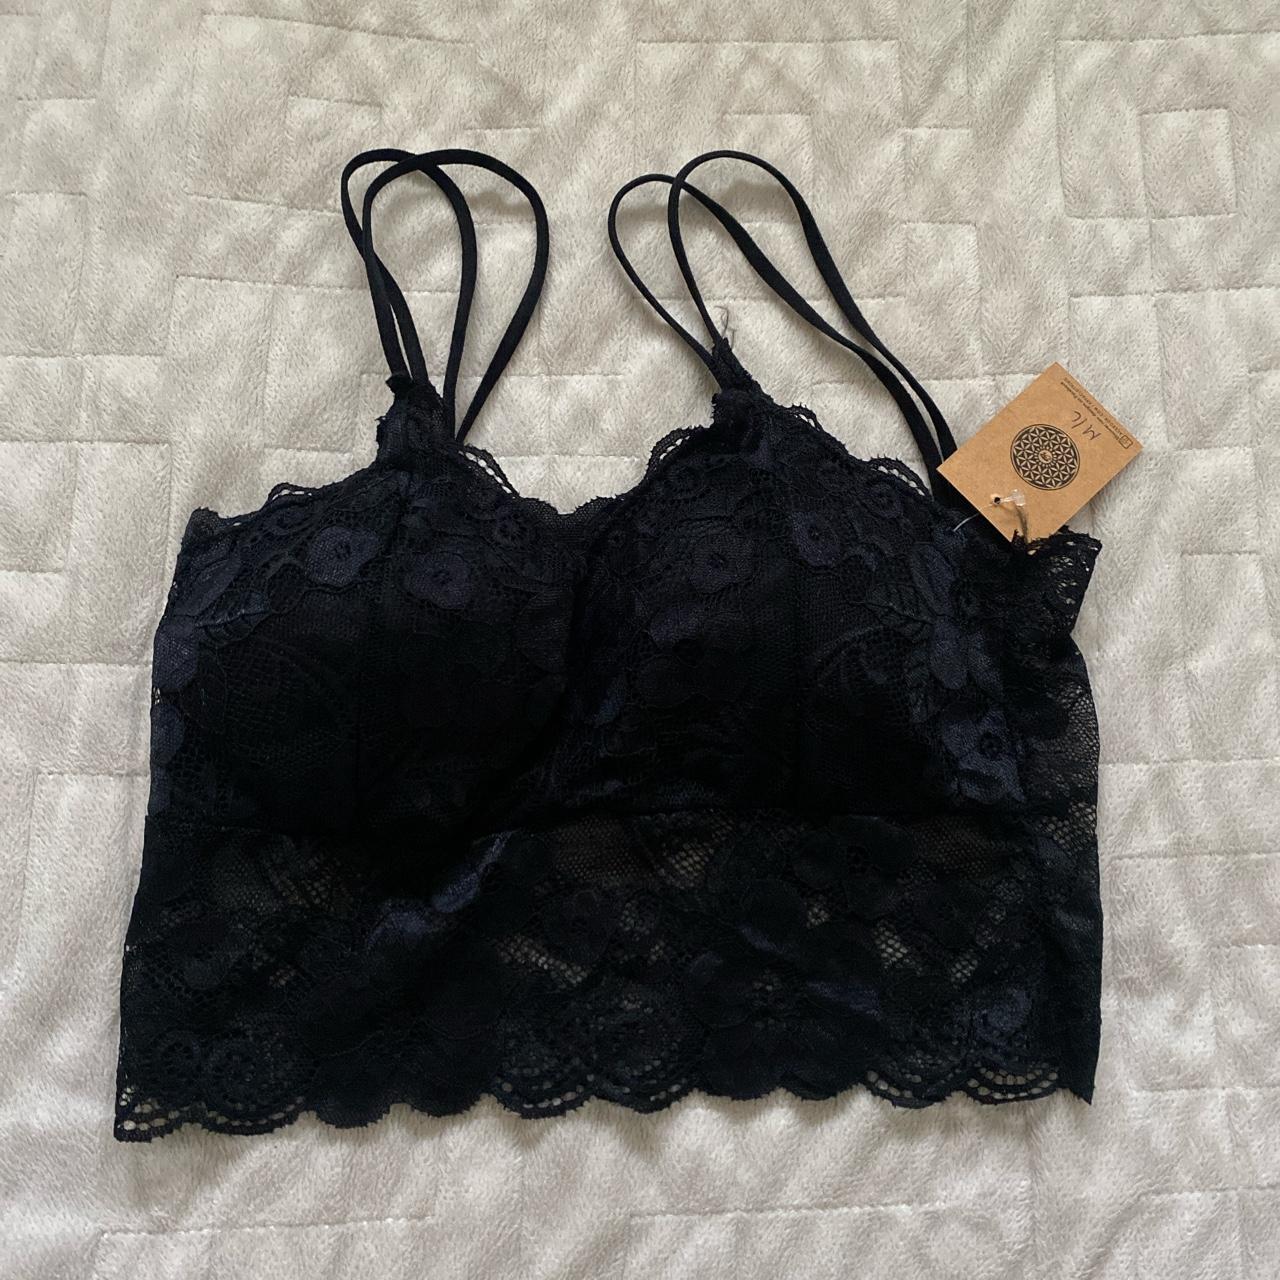 Lacy bralette - Arya Clothing Removable... - Depop